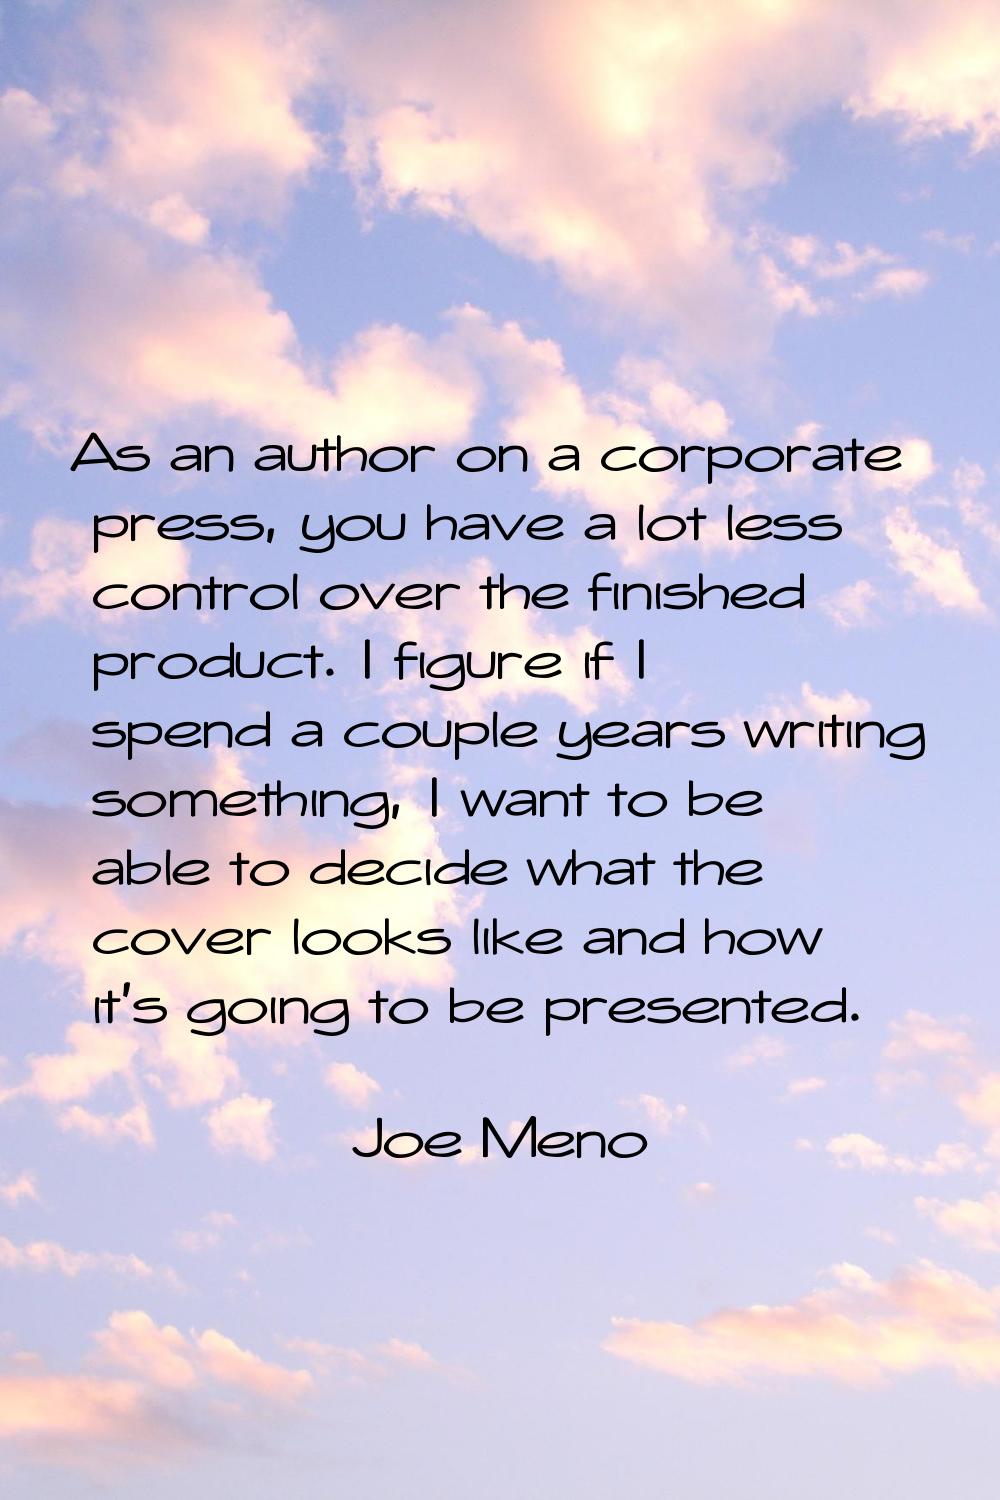 As an author on a corporate press, you have a lot less control over the finished product. I figure 